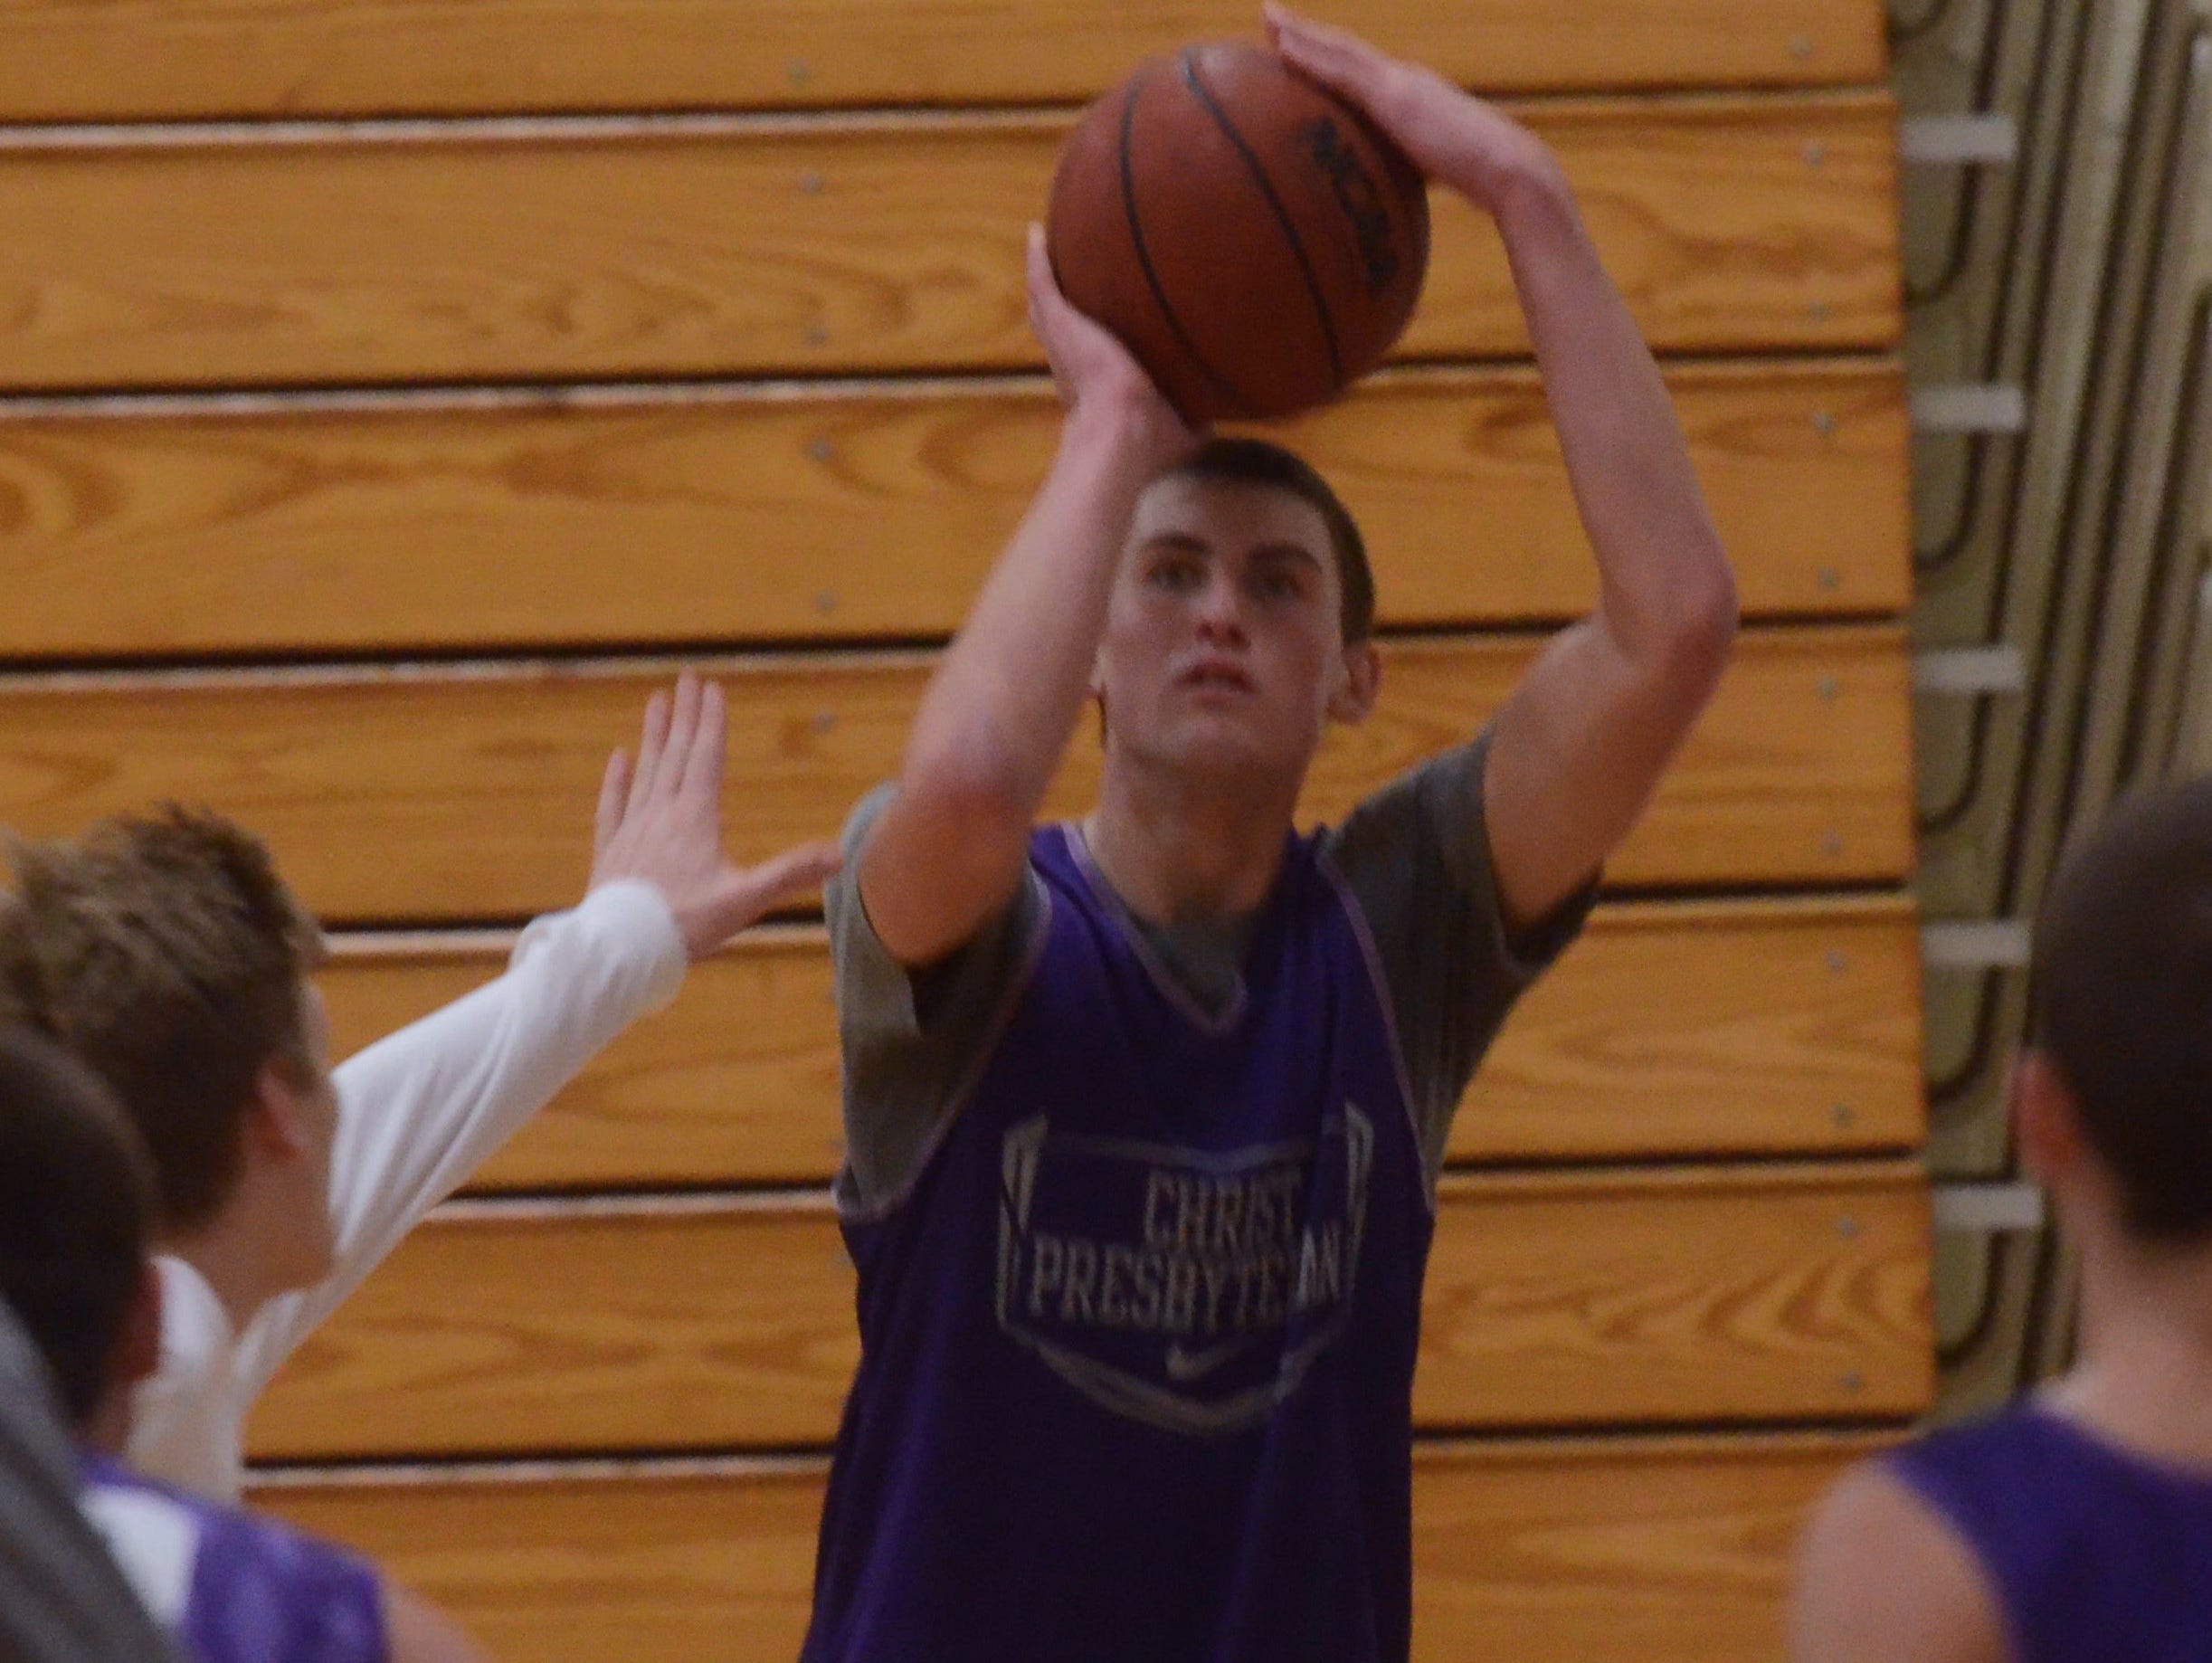 Christ Presbyterian Academy junior Drew Scott shoots a 3-pointer during practice on Wednesday. The Lions have hit 259 3-pointers this season.